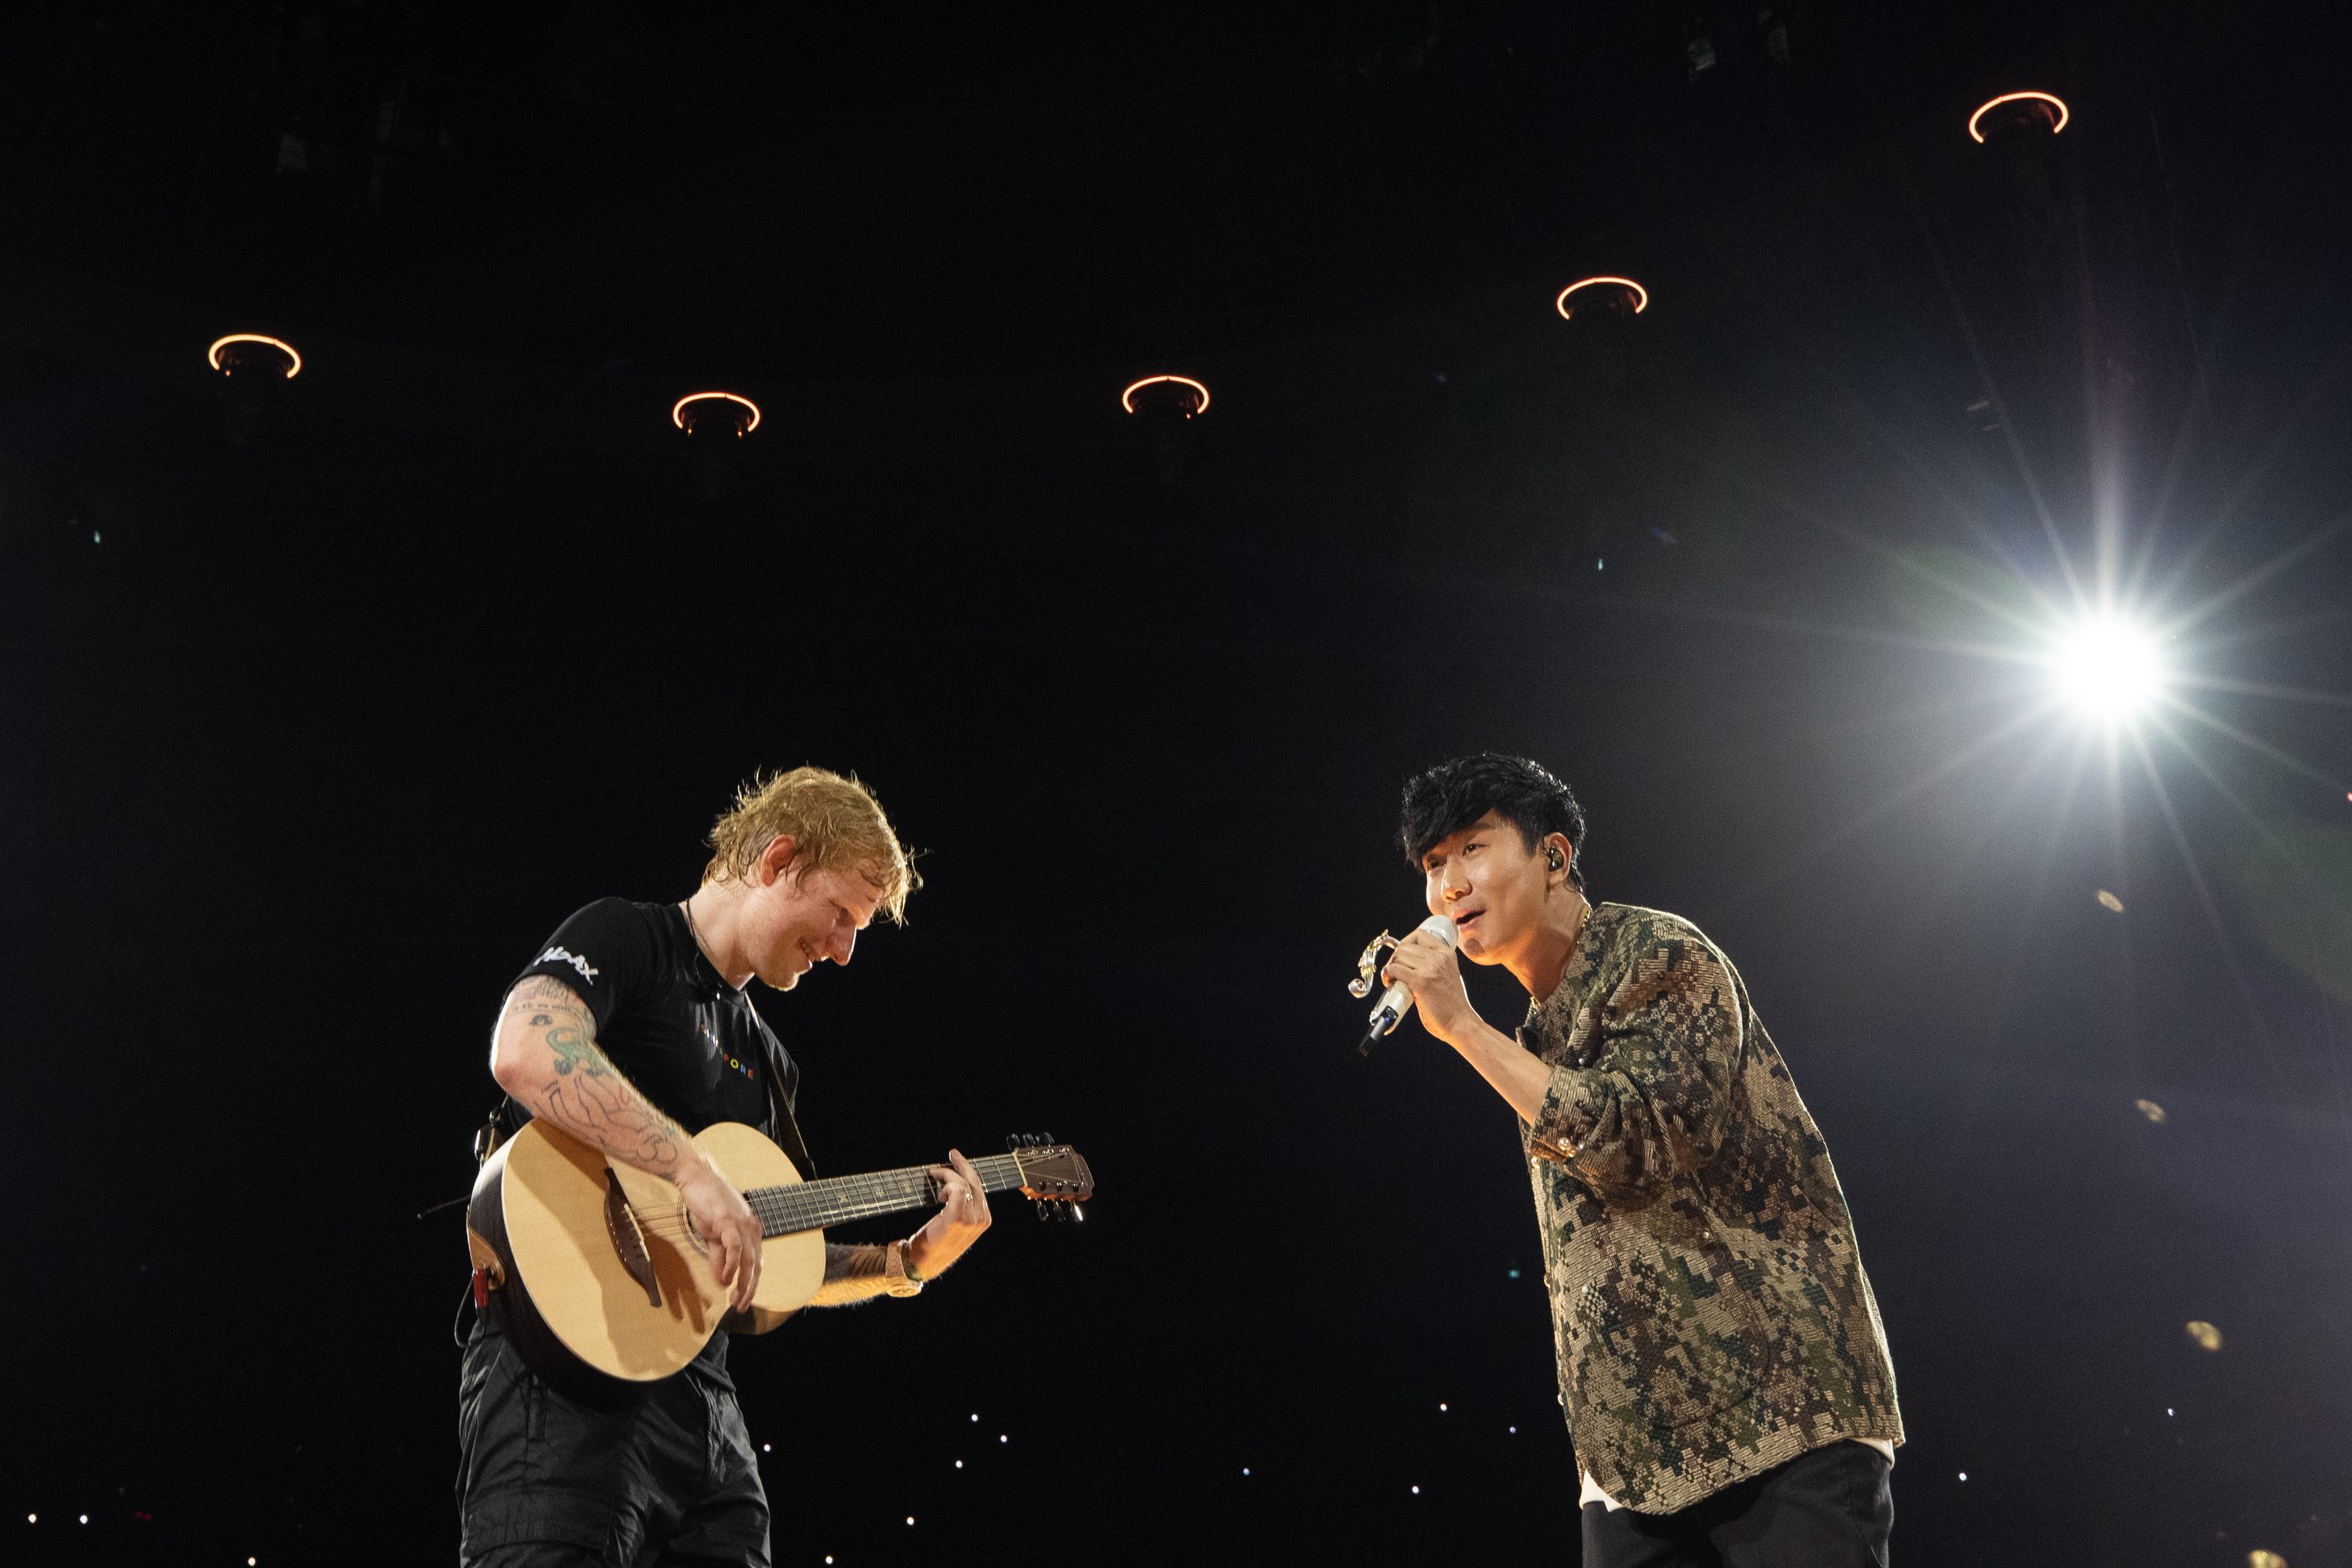 Ed Sheeran’s concert in Singapore: Highlights, Ed's pre-birthday celebration and surprise guest JJ Lin